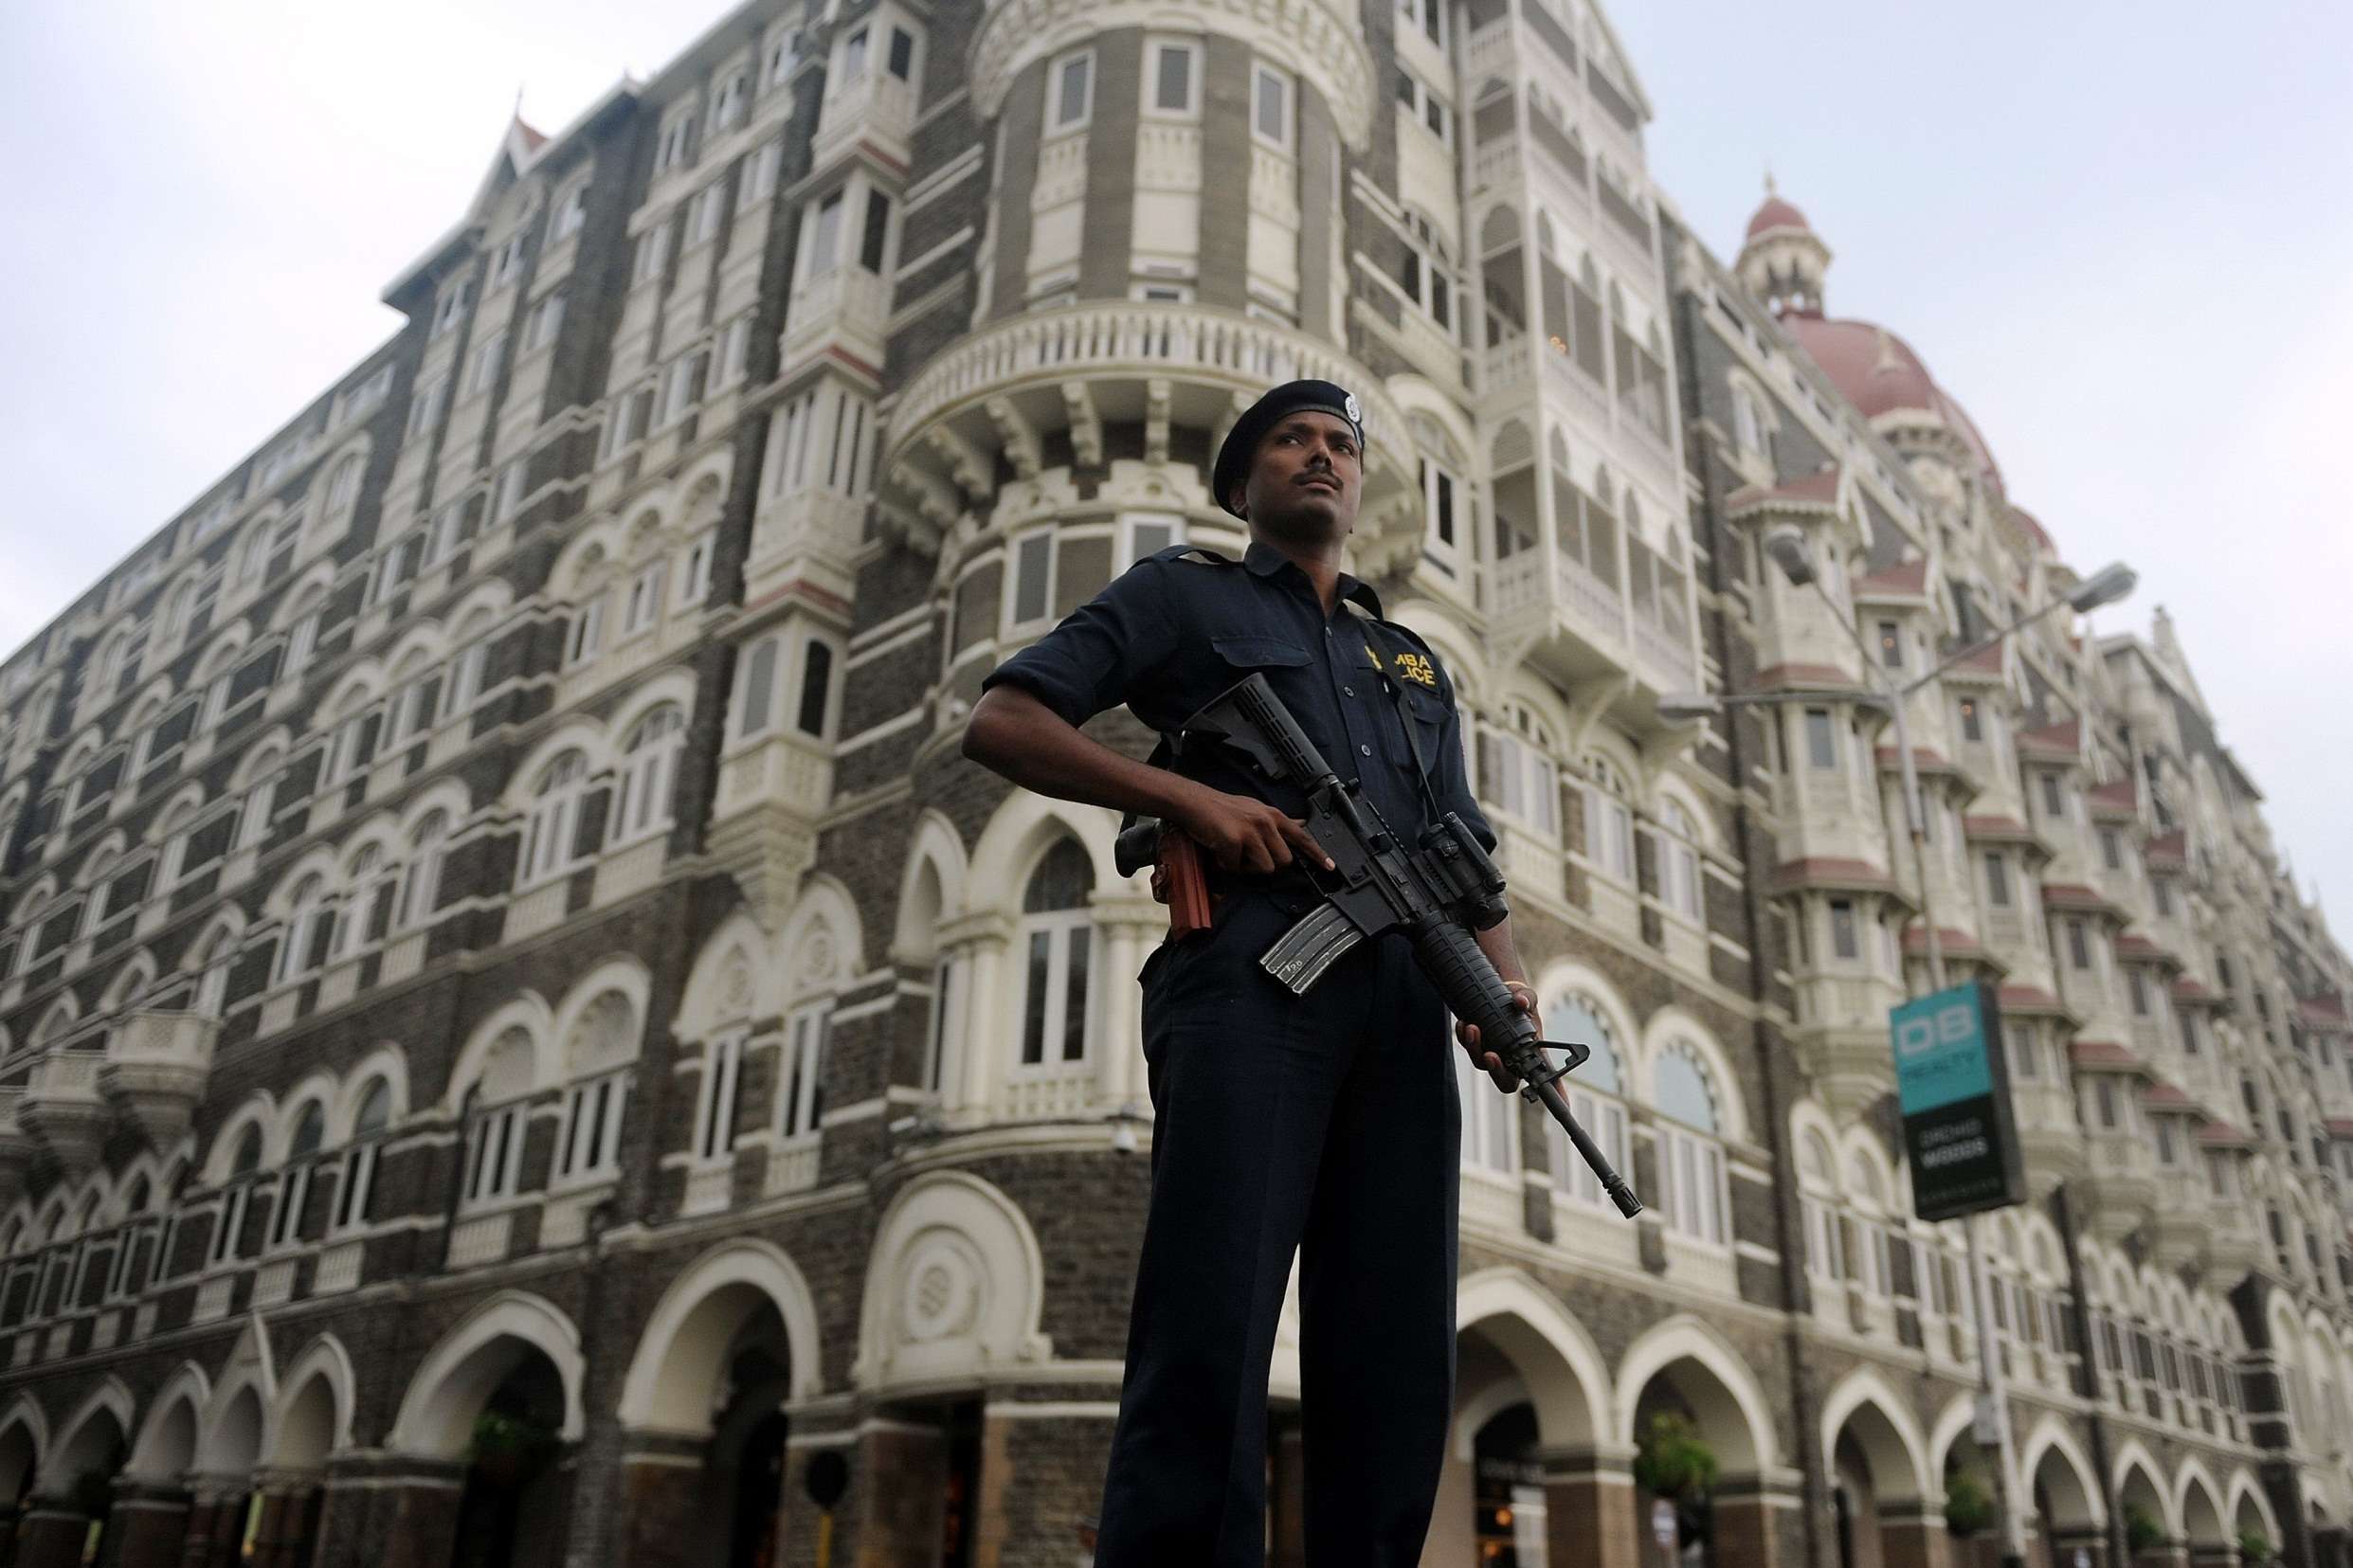 26/11: 'India not responding to Pakistan's request to send witnesses'